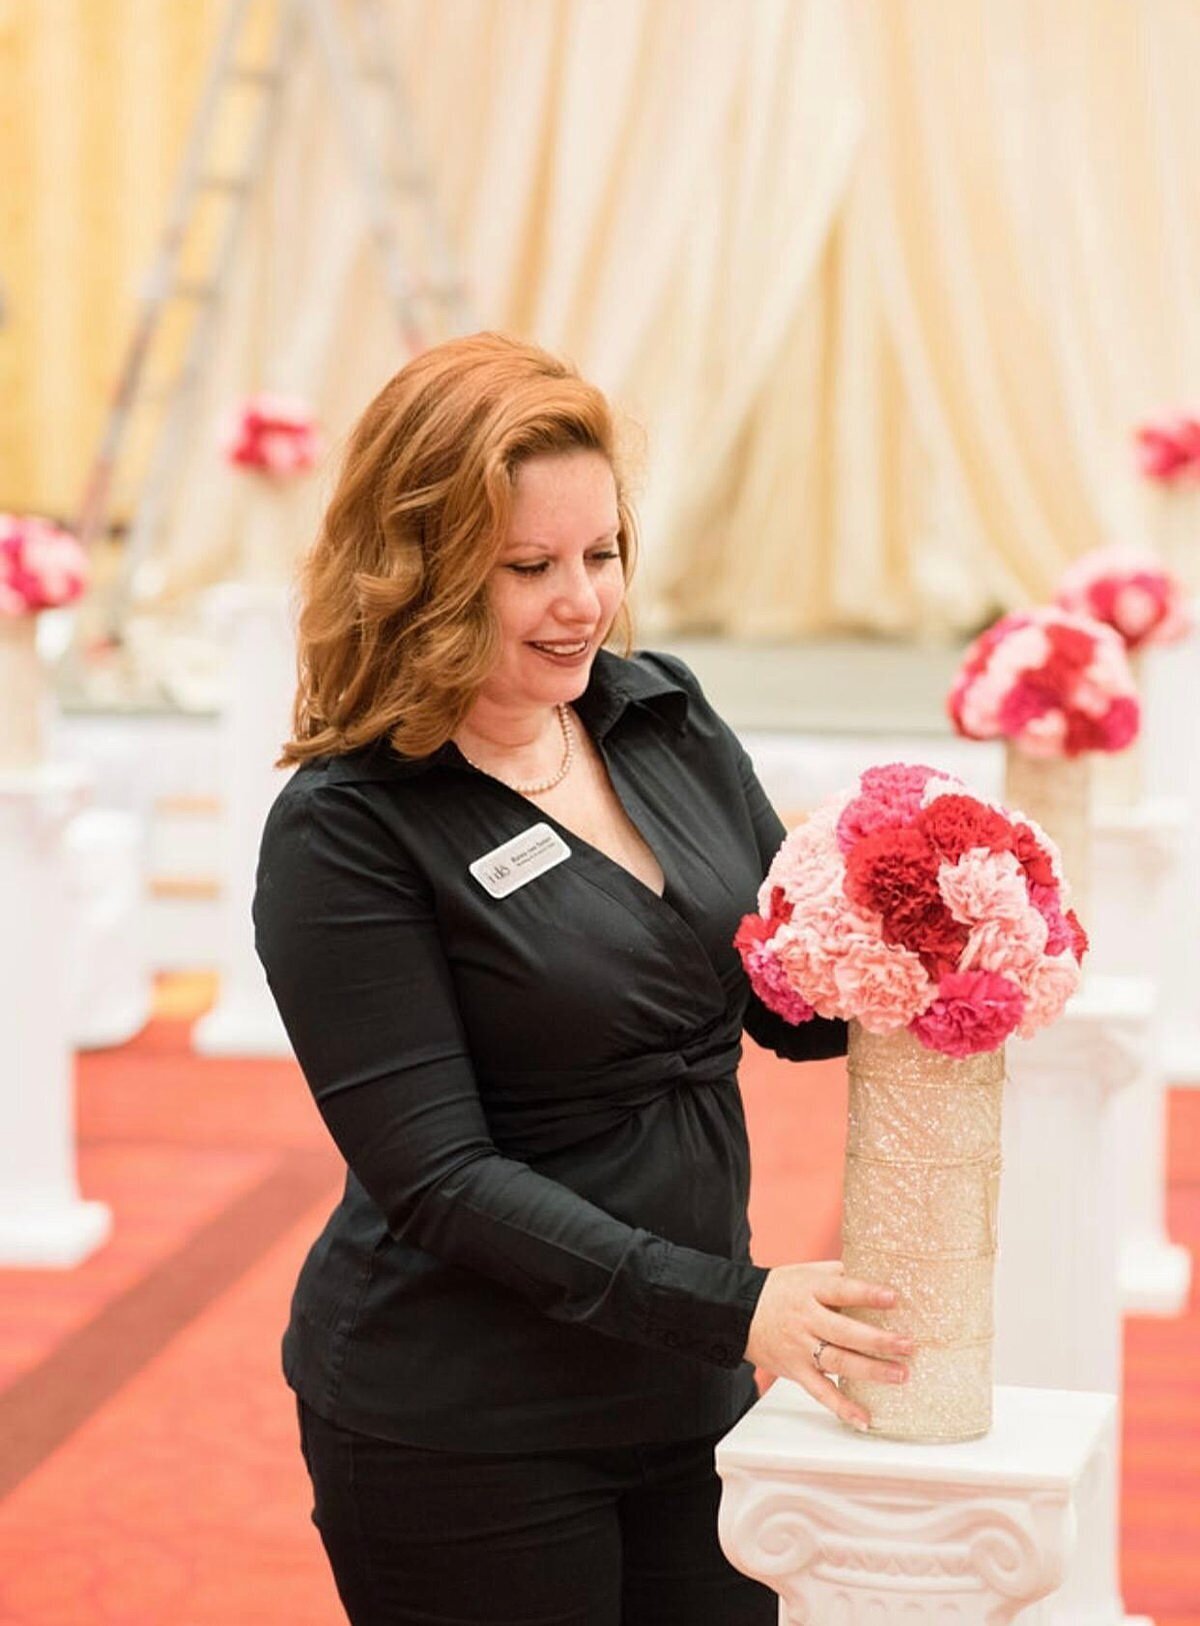 wedding planner helps with floral decor